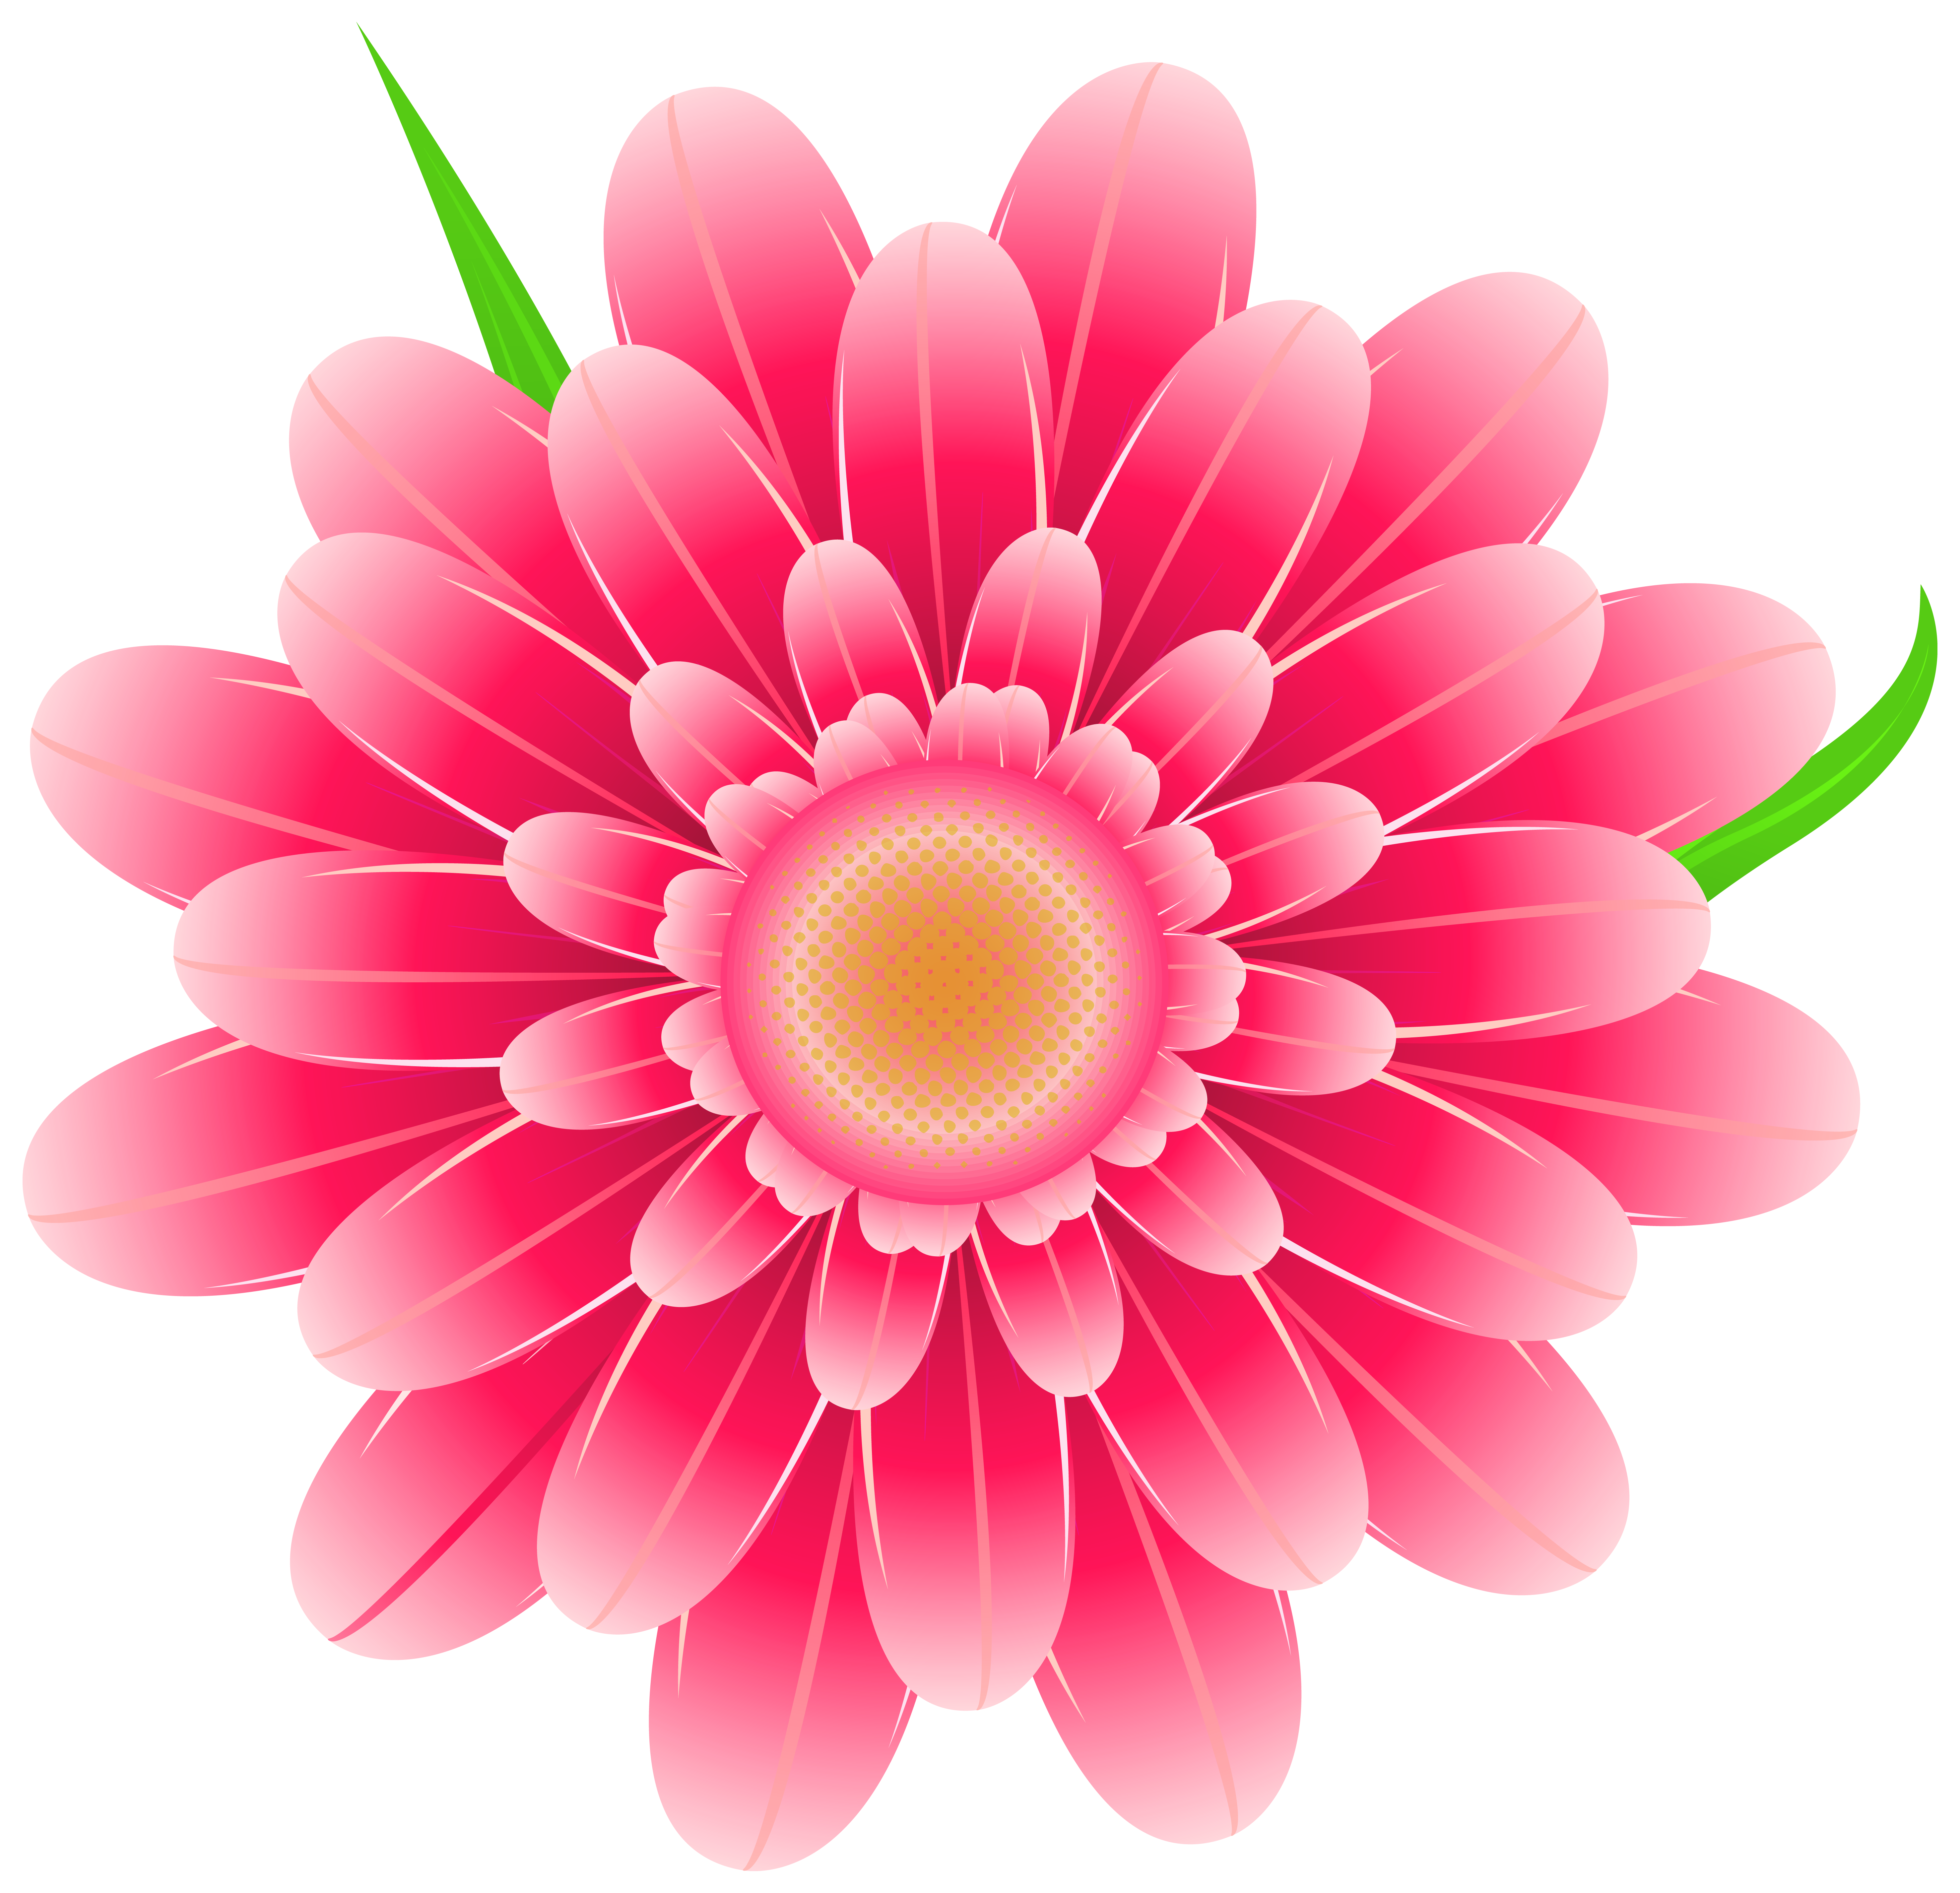 Transparent Pink Flower Clipart PNG Image | Gallery Yopriceville - High ...